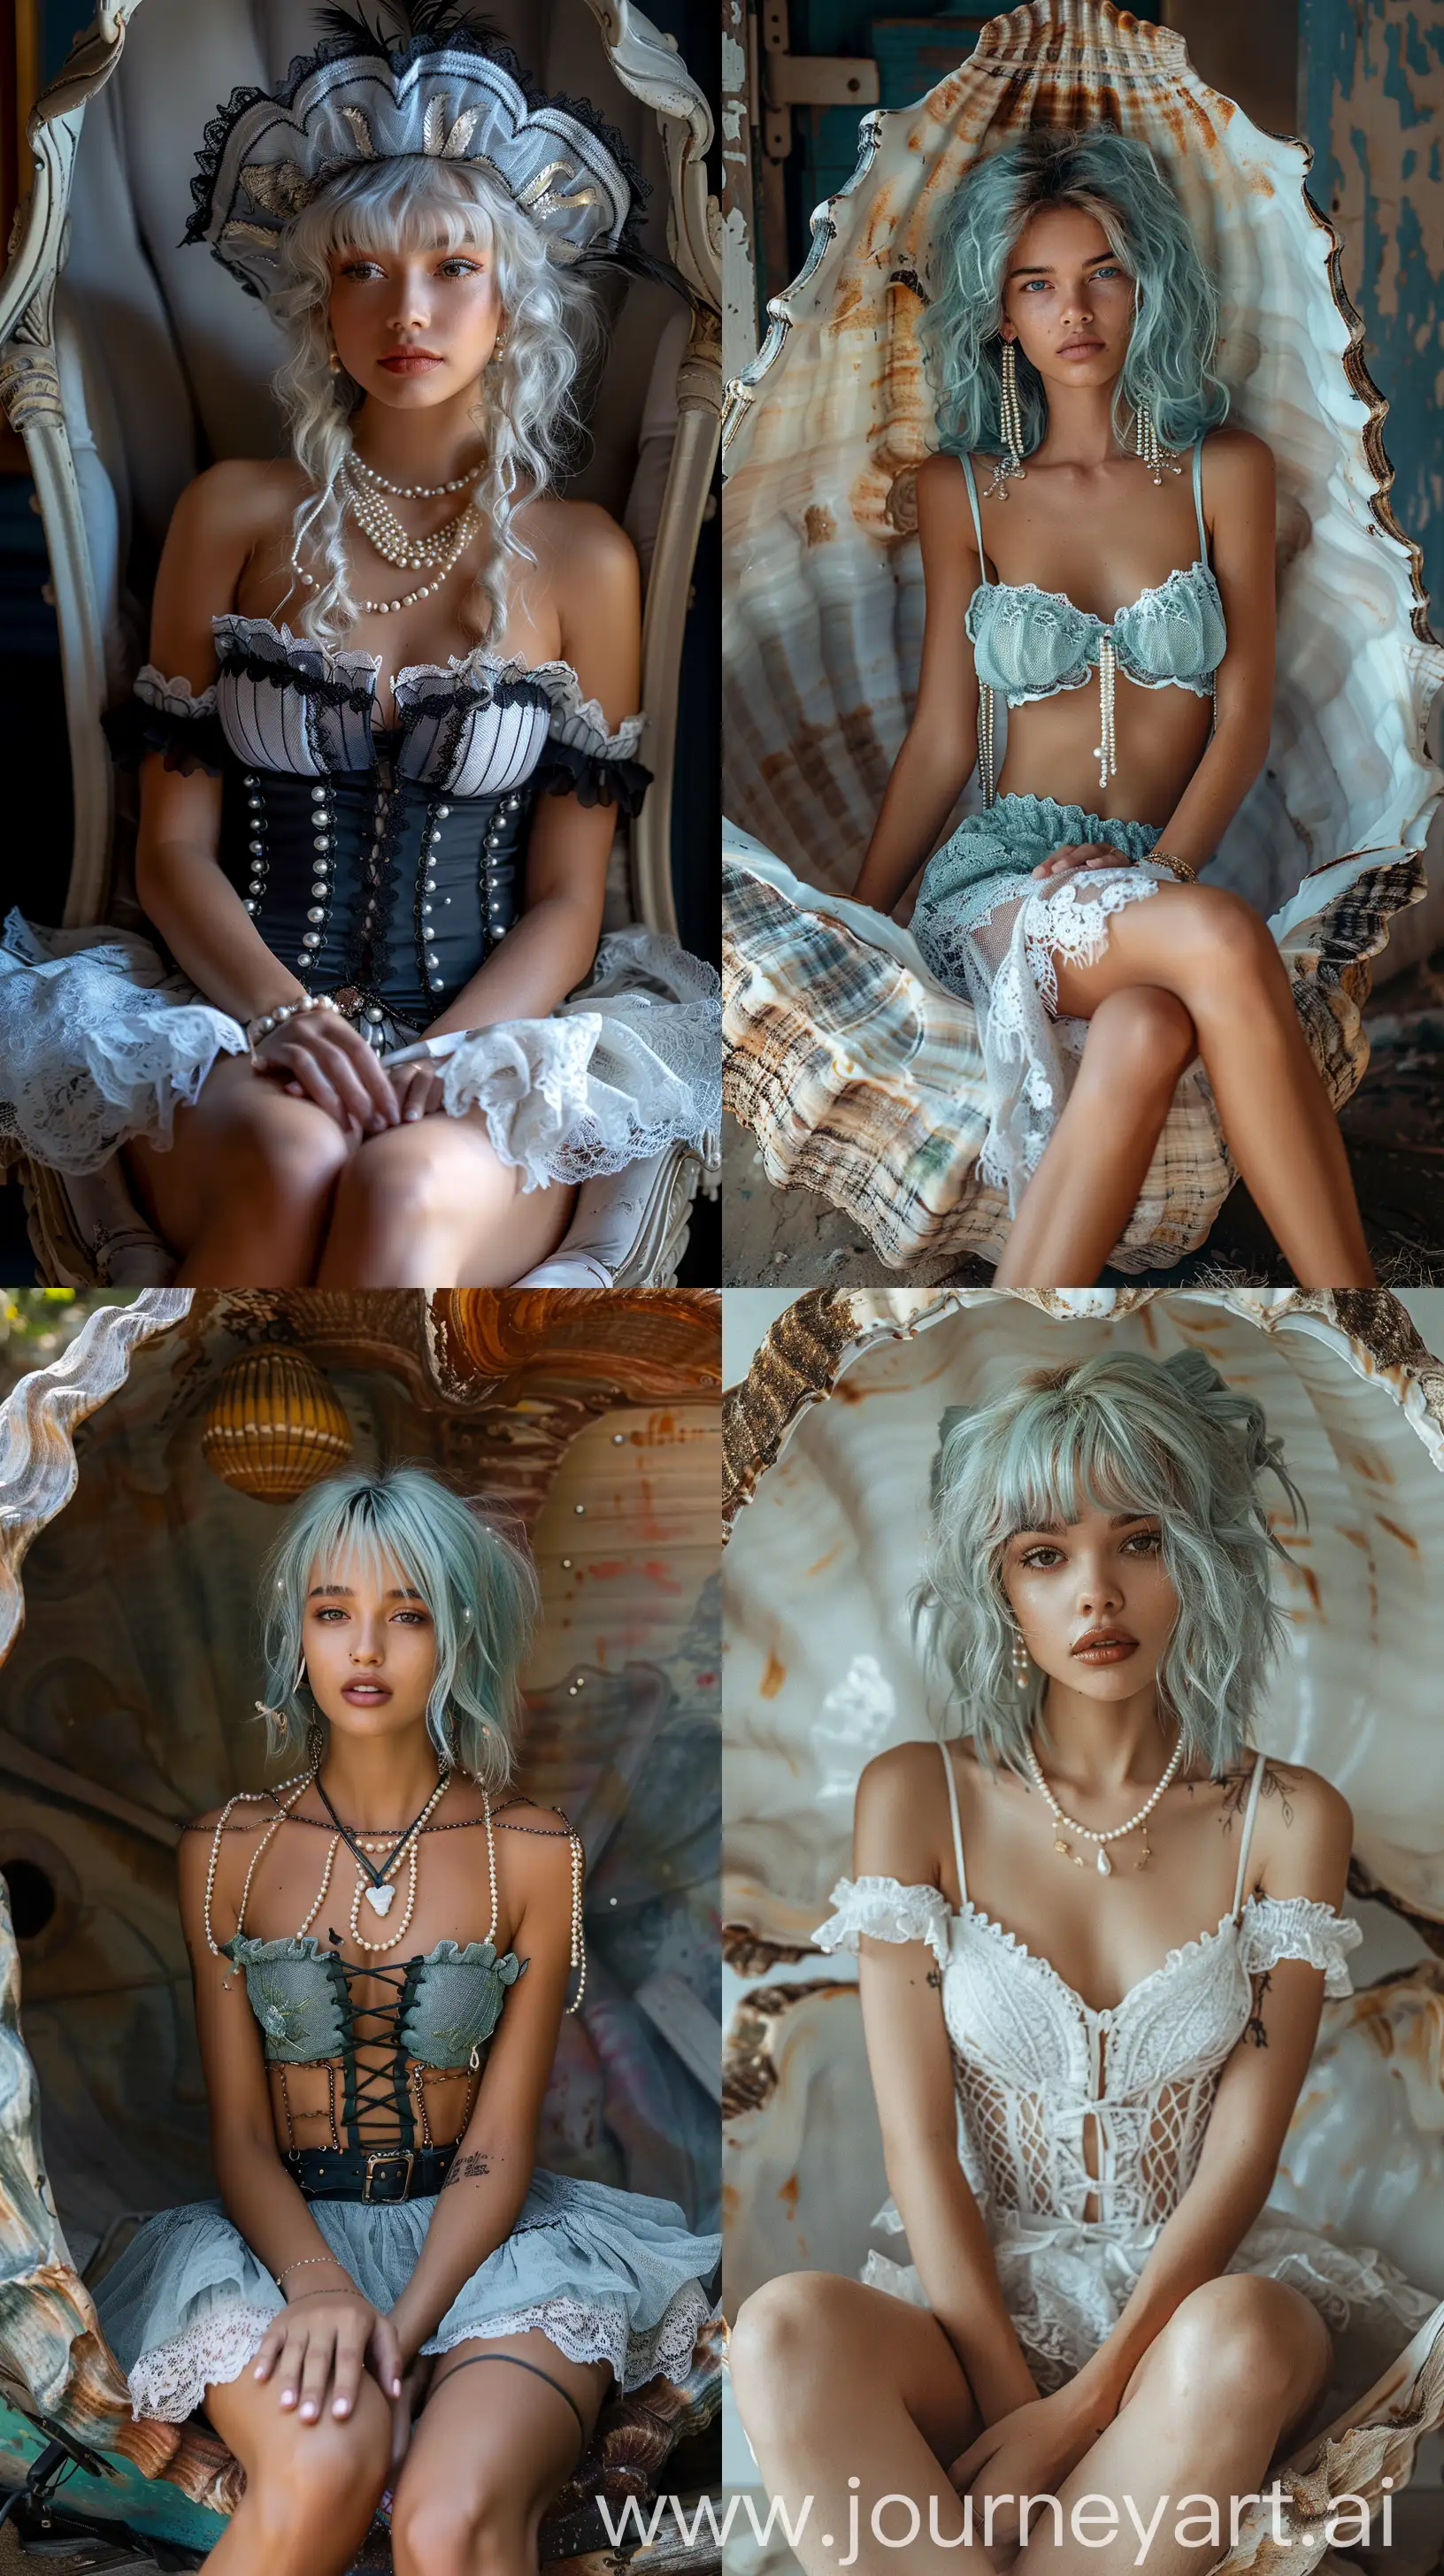 Fashion-Model-with-Blue-Hair-and-Pearl-Adornments-in-a-Shell-Setting